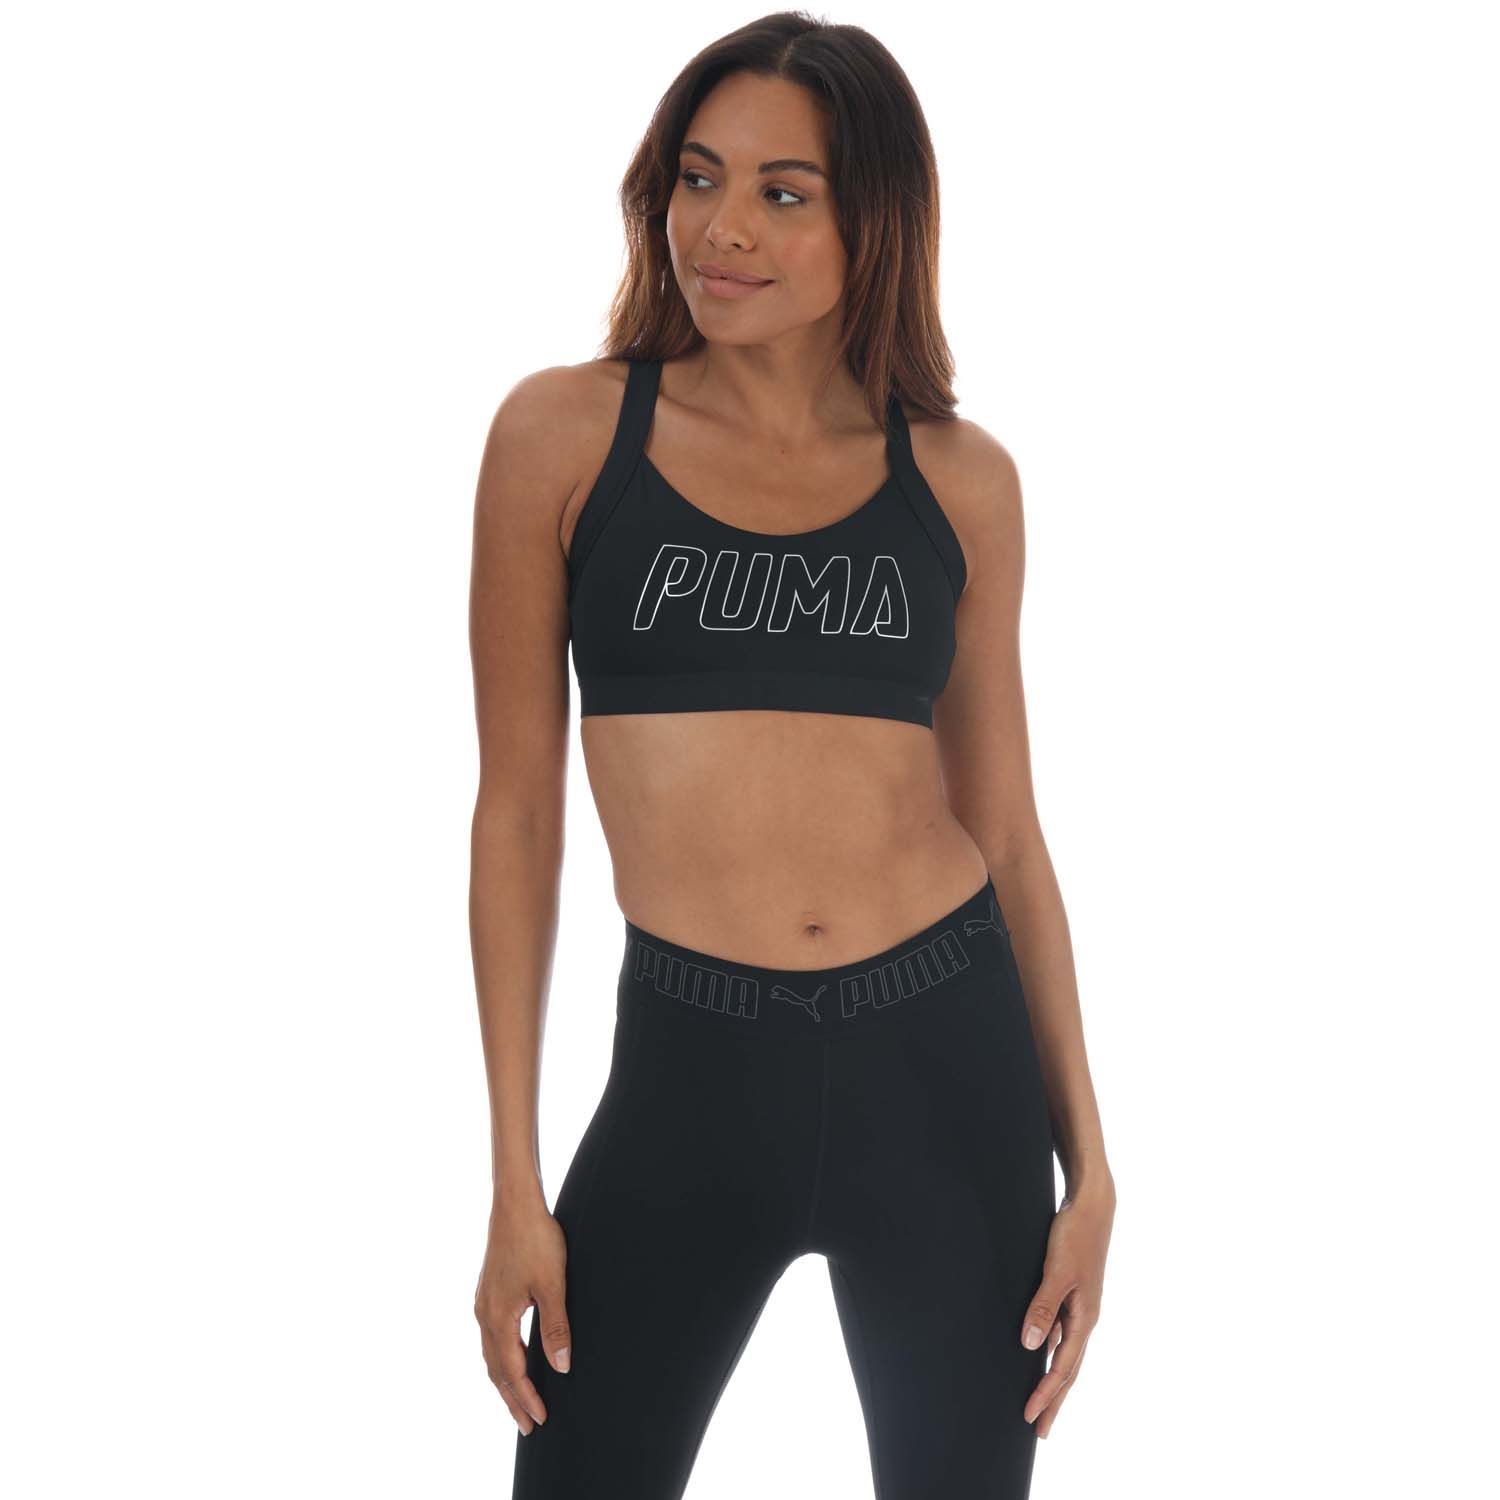 Womens Puma Training Bra in black.- Breathable spacer knit fabric adds lightweight padding and coverage.- Racerback design.- PUMA Cat Logo on back strap.- Shell: 85% Polyester  15% Elastane. Mesh: 87% Polyester  13% Elastane. Lining: 91% Polyester  9%  Elastane.- Ref: 51908501